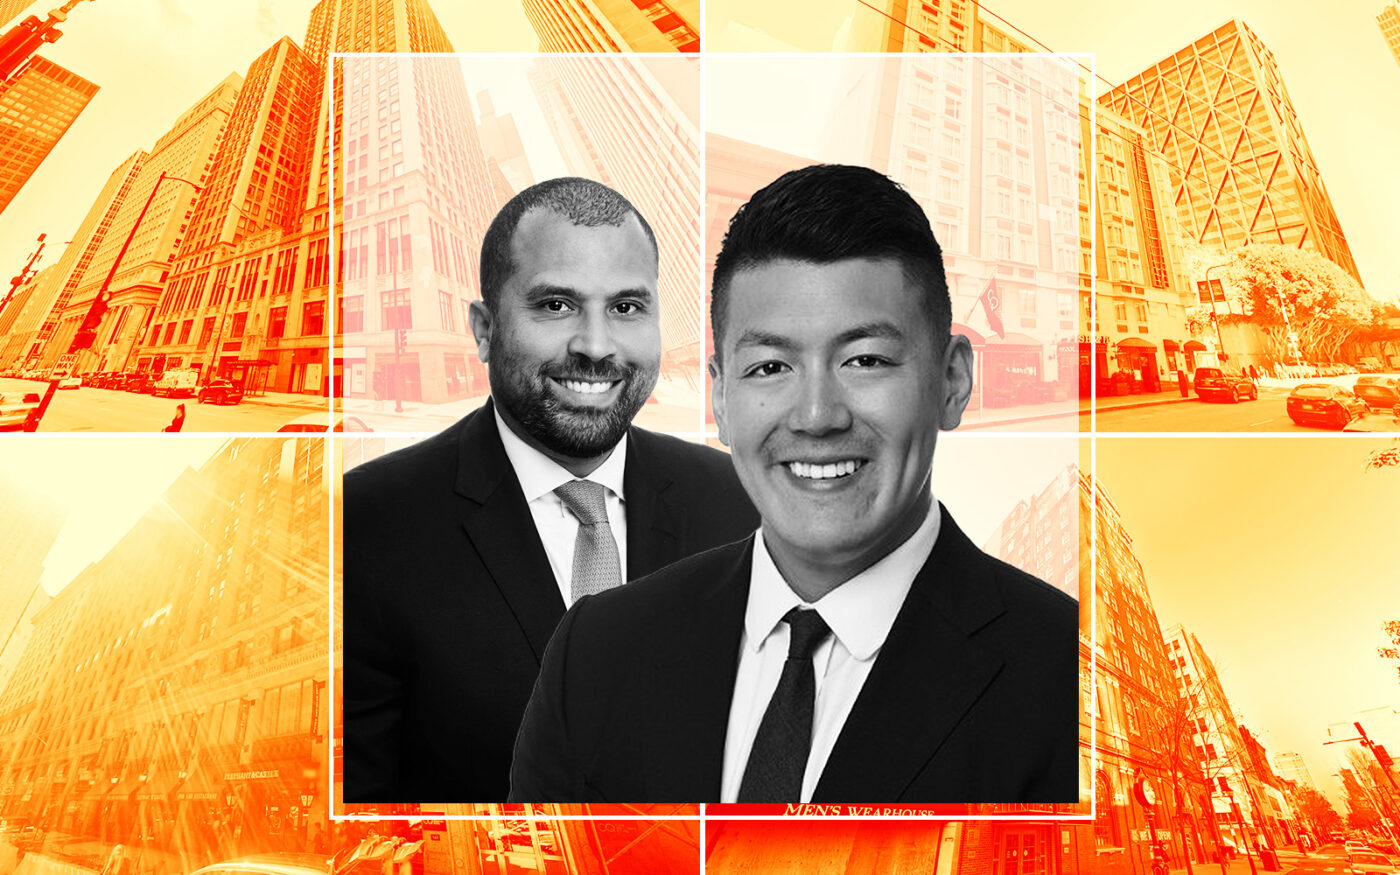 Club Quarters hotels at 111 West Adams Street in Chicago, 424 Clay Street in San Francisco, 161 Devonshire Street in Boston and 1628 Chestnut Street in Philadelphia with JLL’s Kevin Davis and Barnett Wu